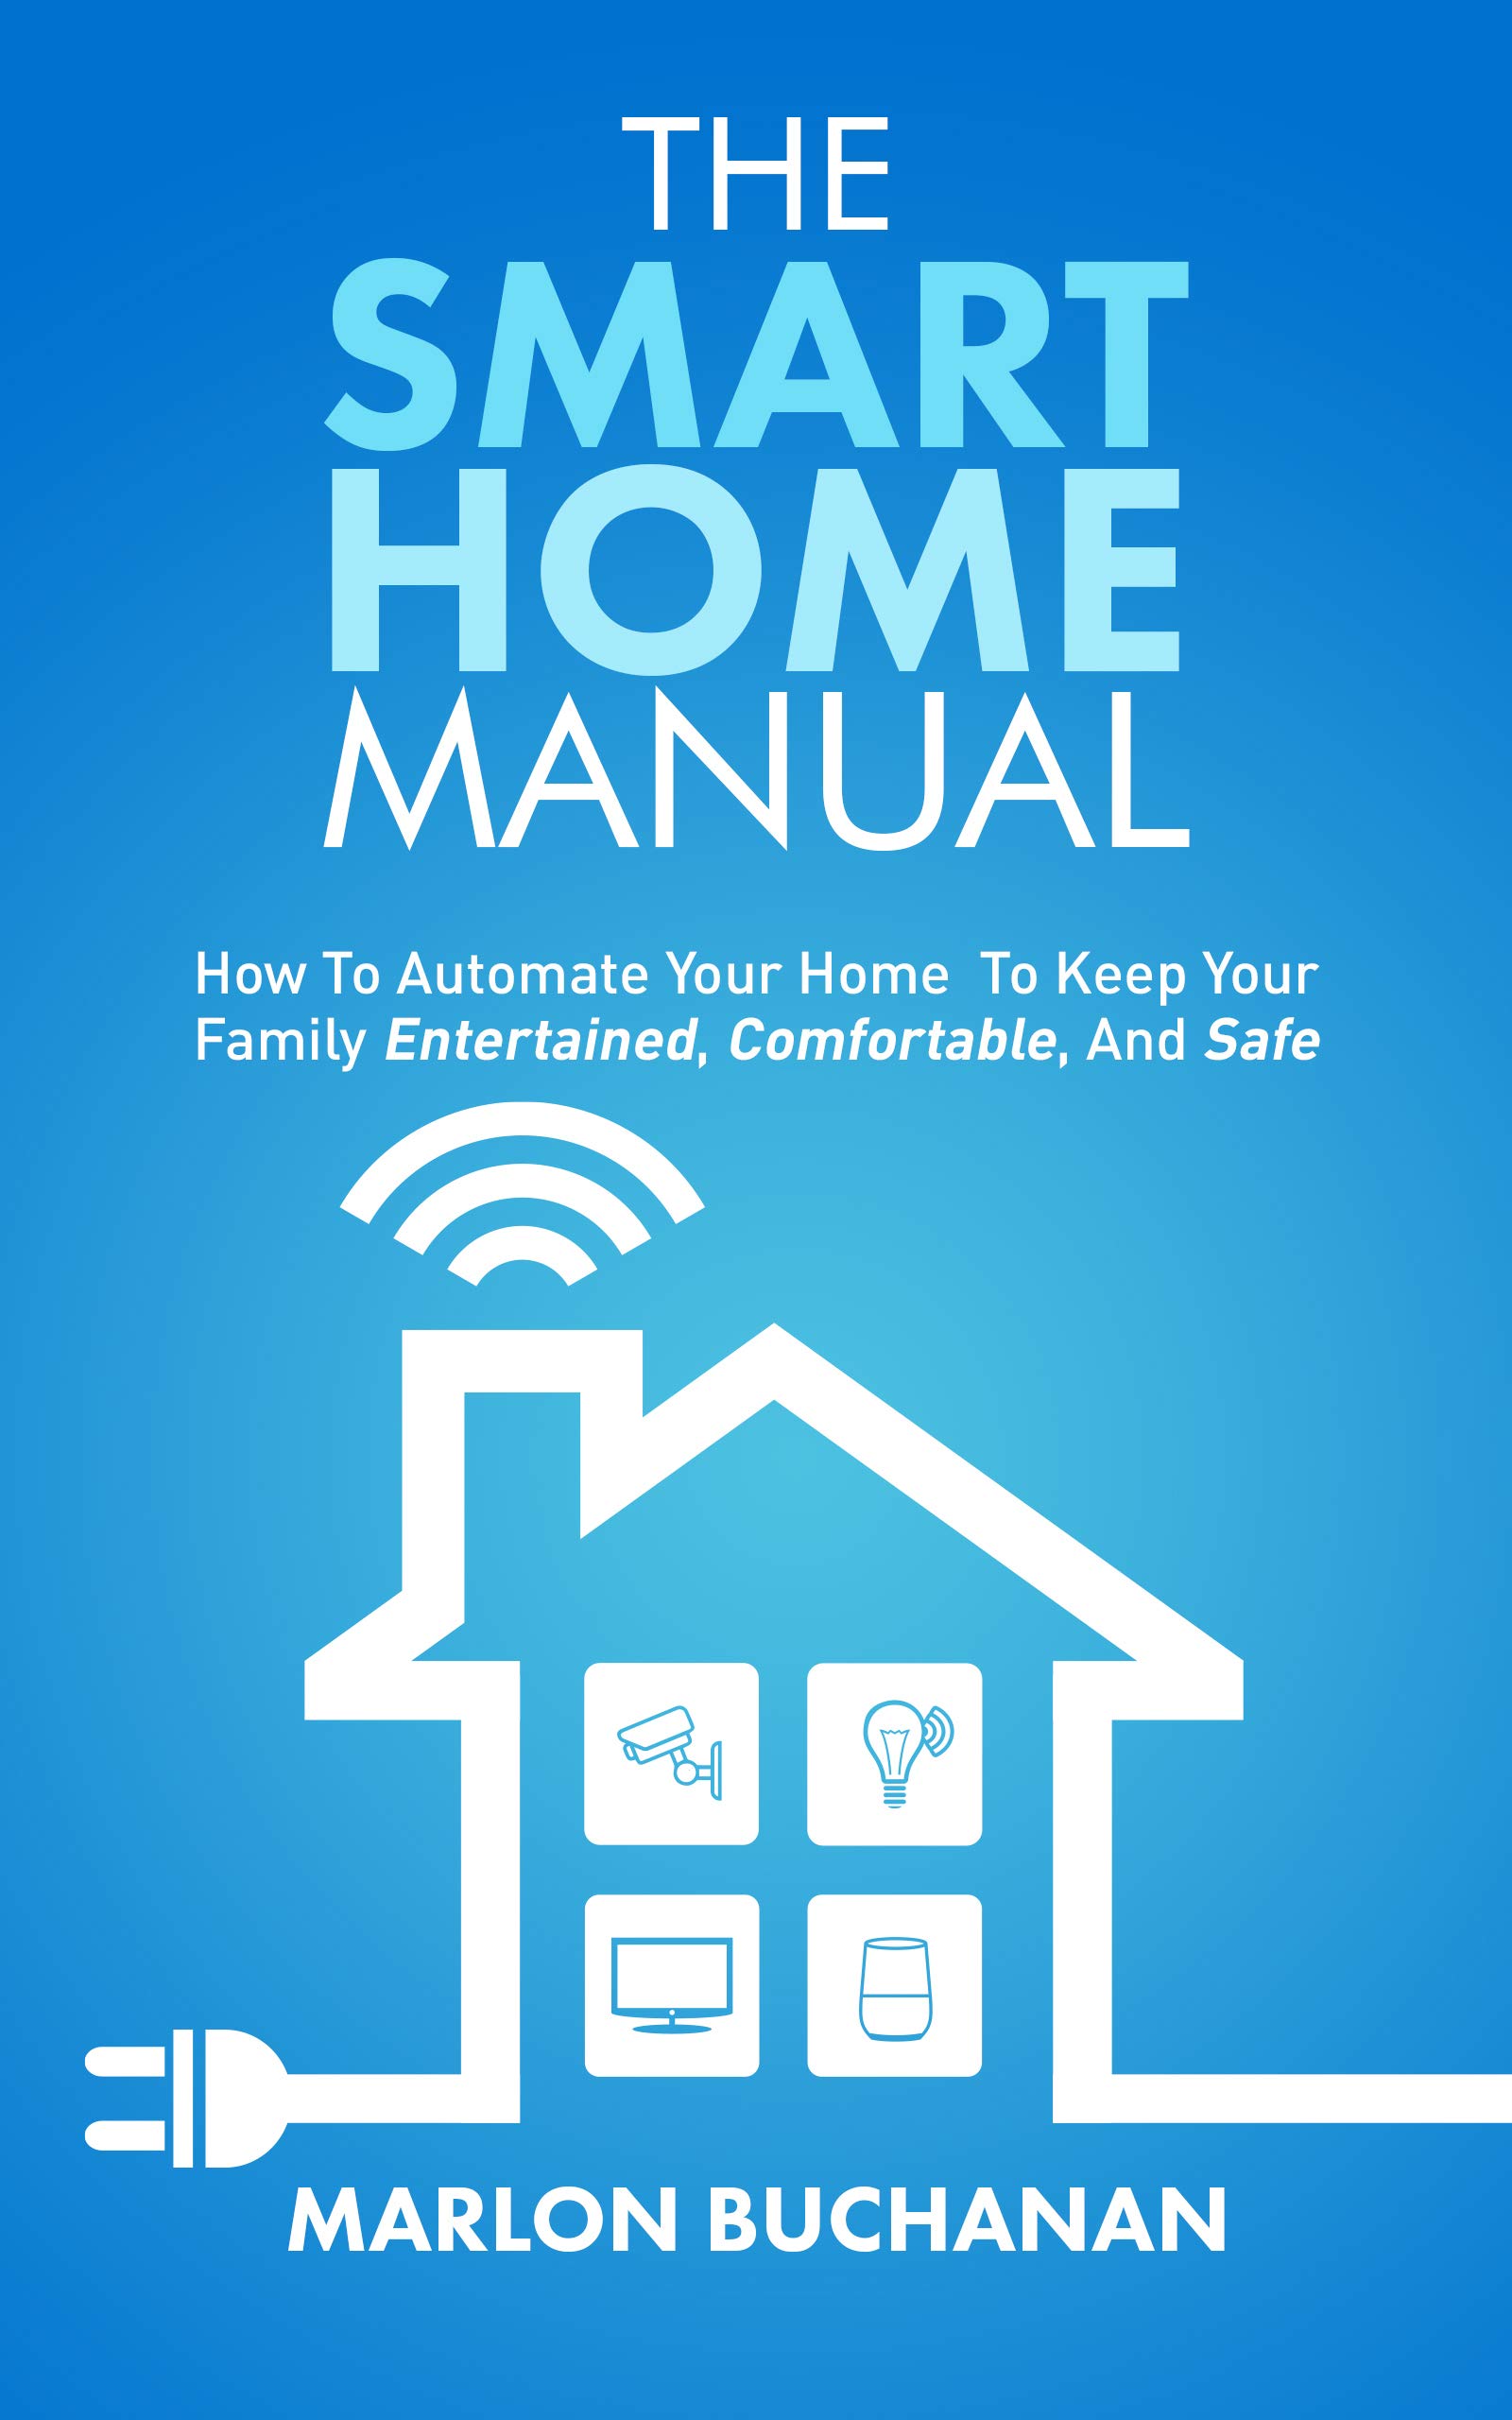 The Smart Home Manual: How to Automate Your Home to Keep Your Family Entertained, Comfortable, and Safe (Home Technology Manuals)